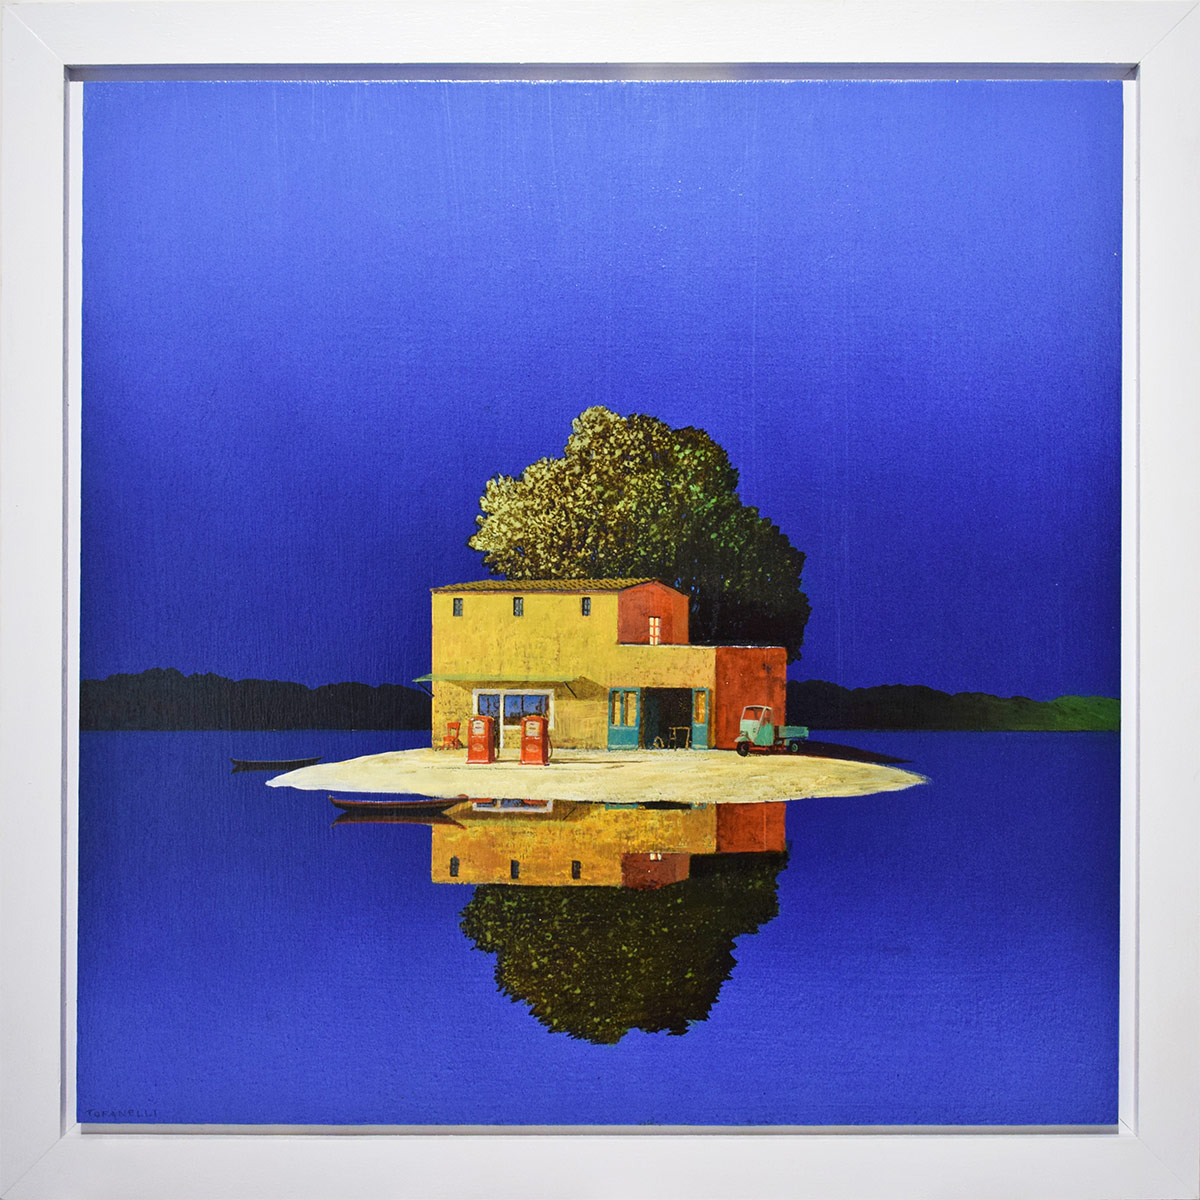 ISOLE III by the artist Alessandro Tofanelli